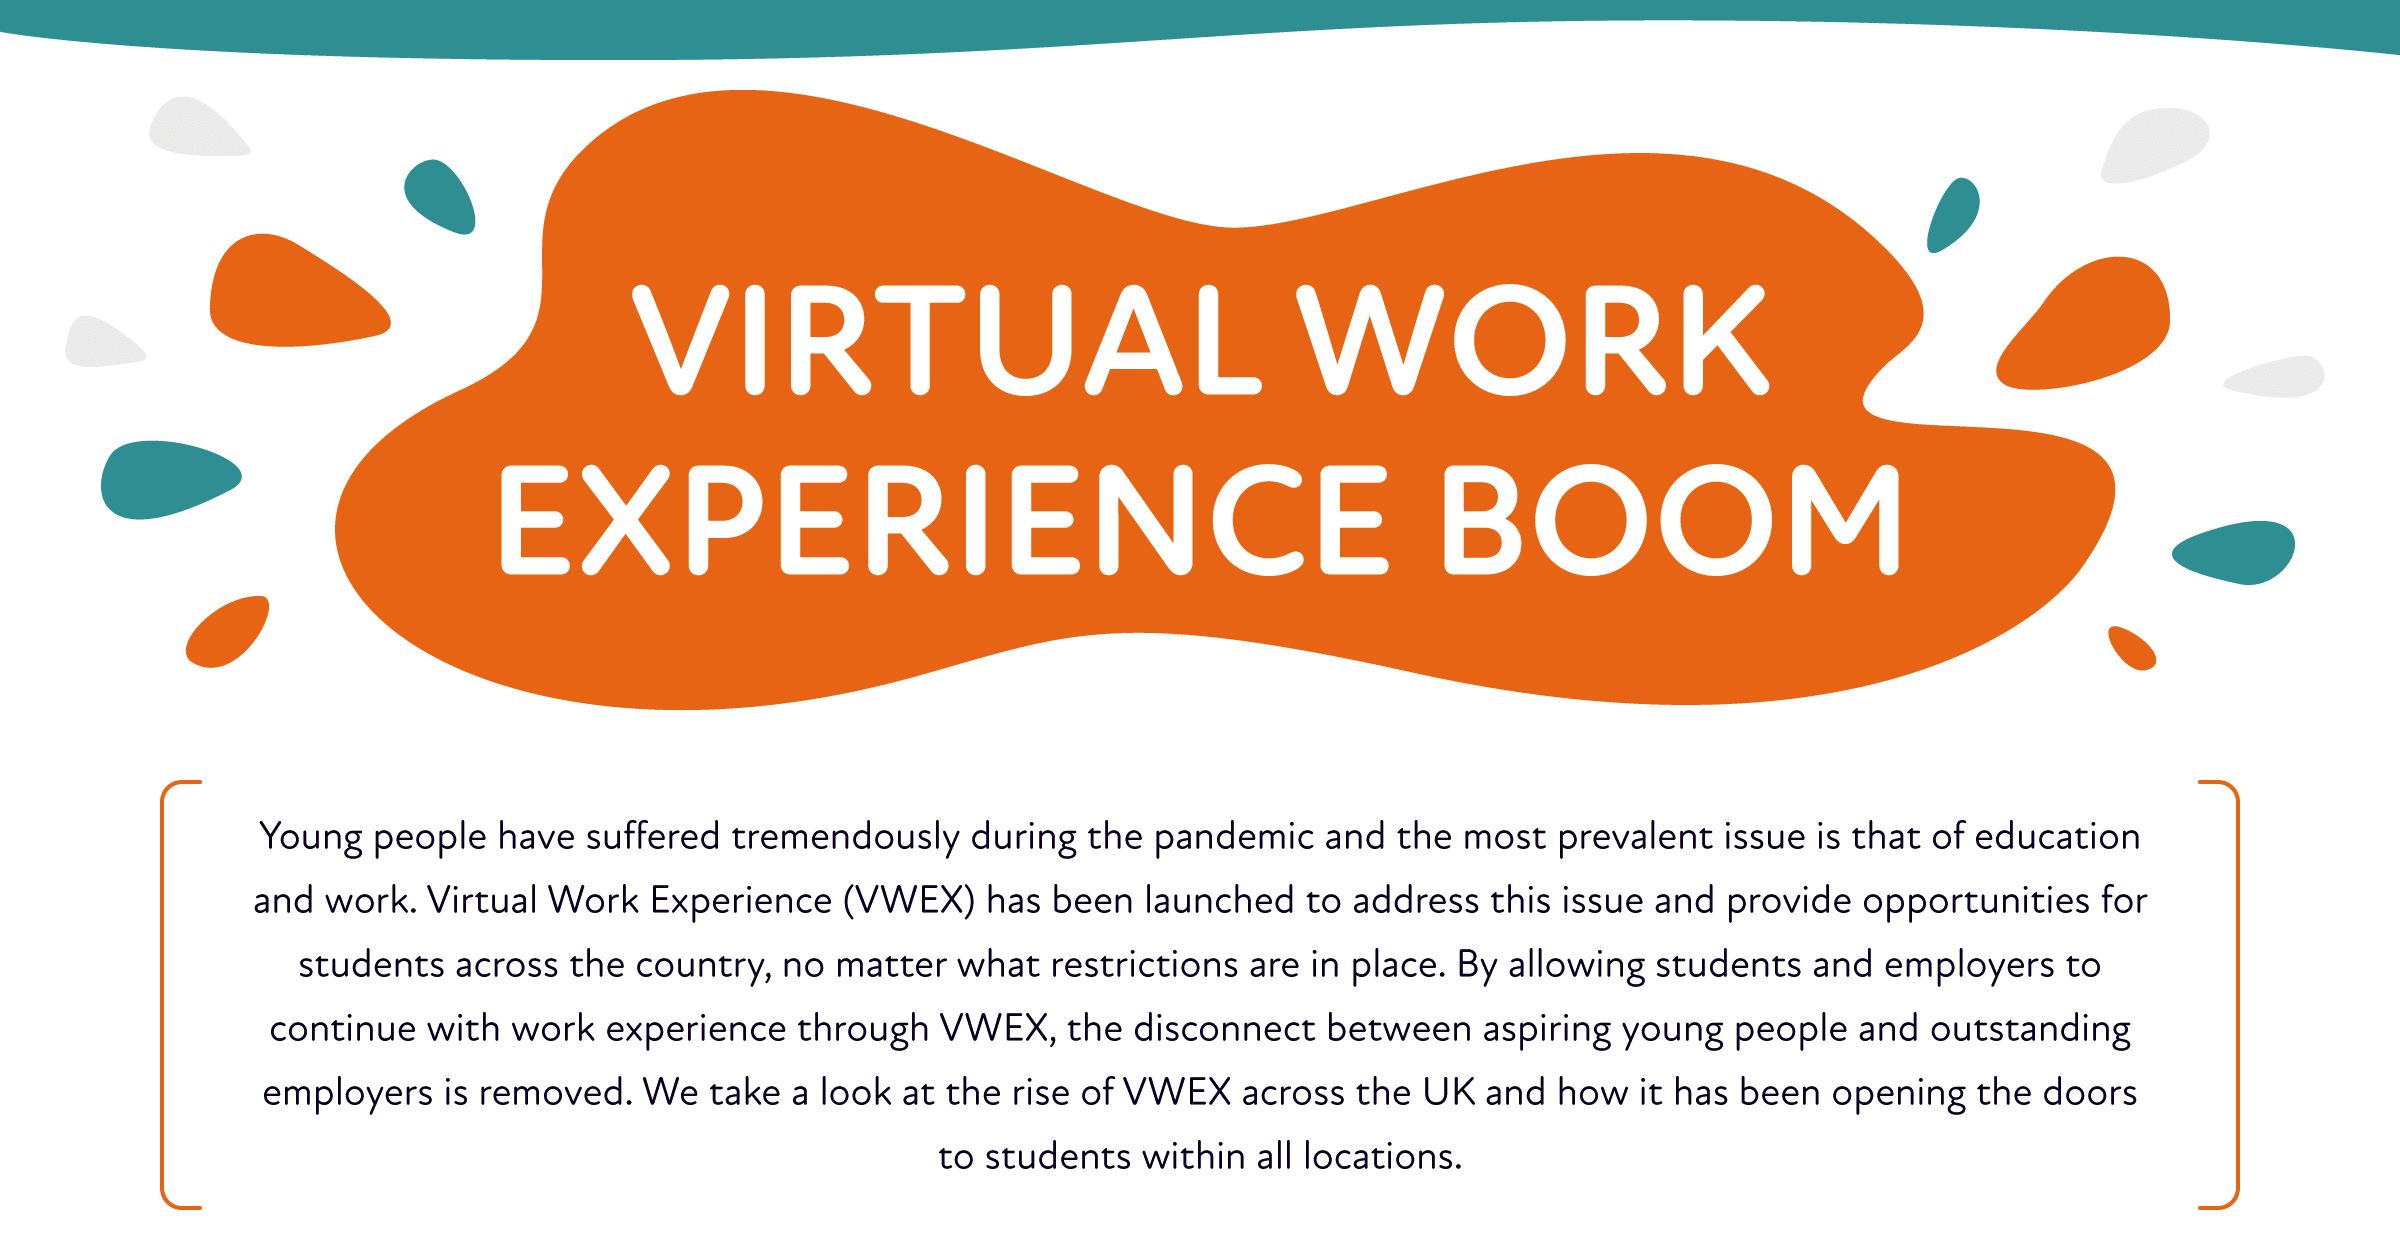 UK-Wide Virtual Work Experience Opportunities Open Up New Career Path Choices for Students